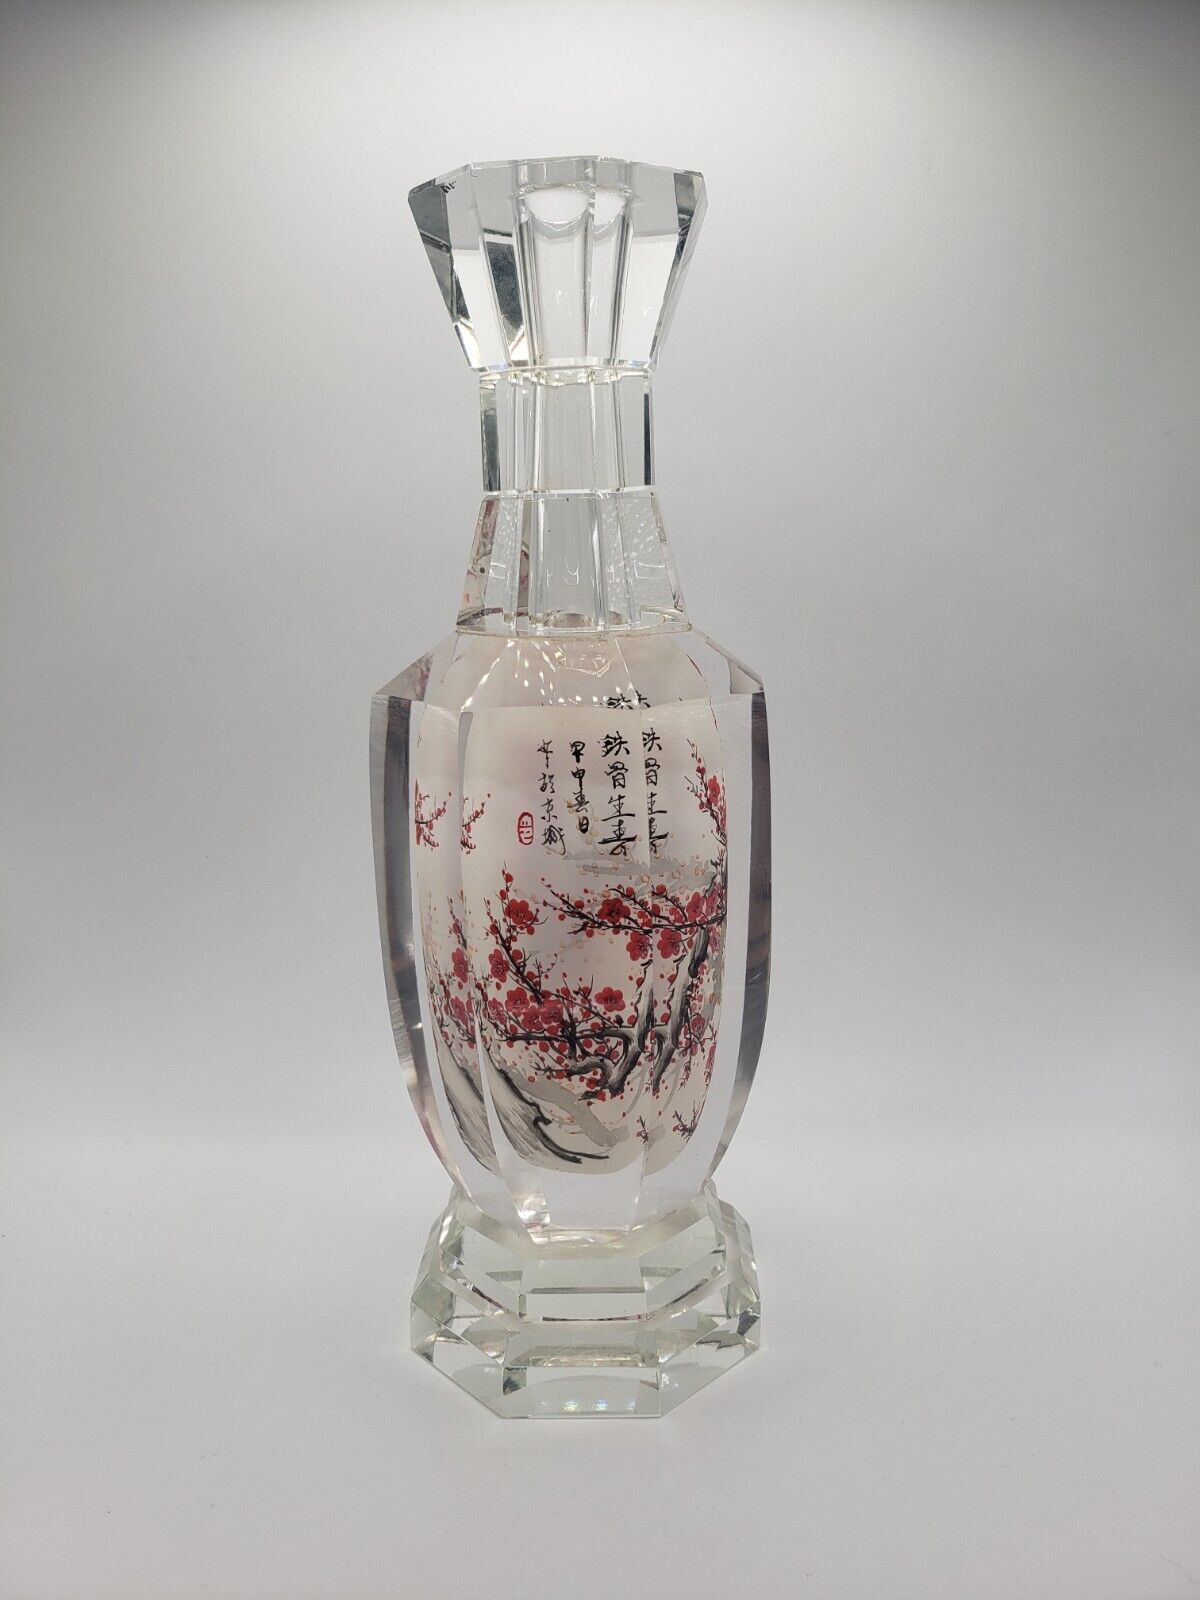 MCM Chinese Reverse Painted Crystal Octagonal Bud Stem Vase Cherry Blossoms 8.5